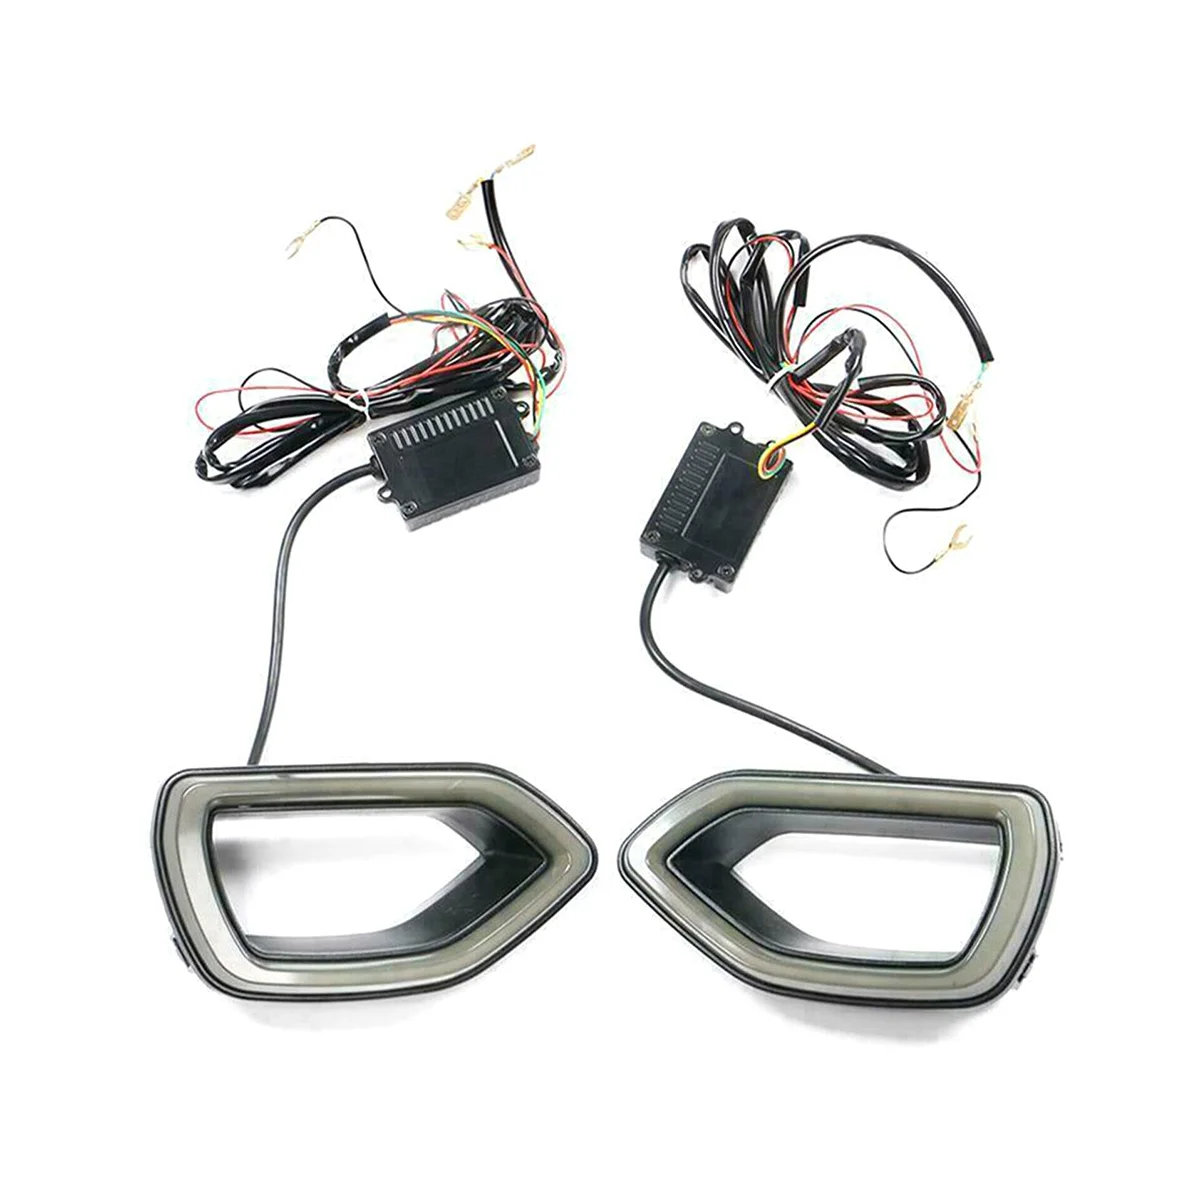 

1Pair Car Grille Normal LED Light for Dodge Charger Daytona 2017-2019 DQZMZBDYT Car Accessories